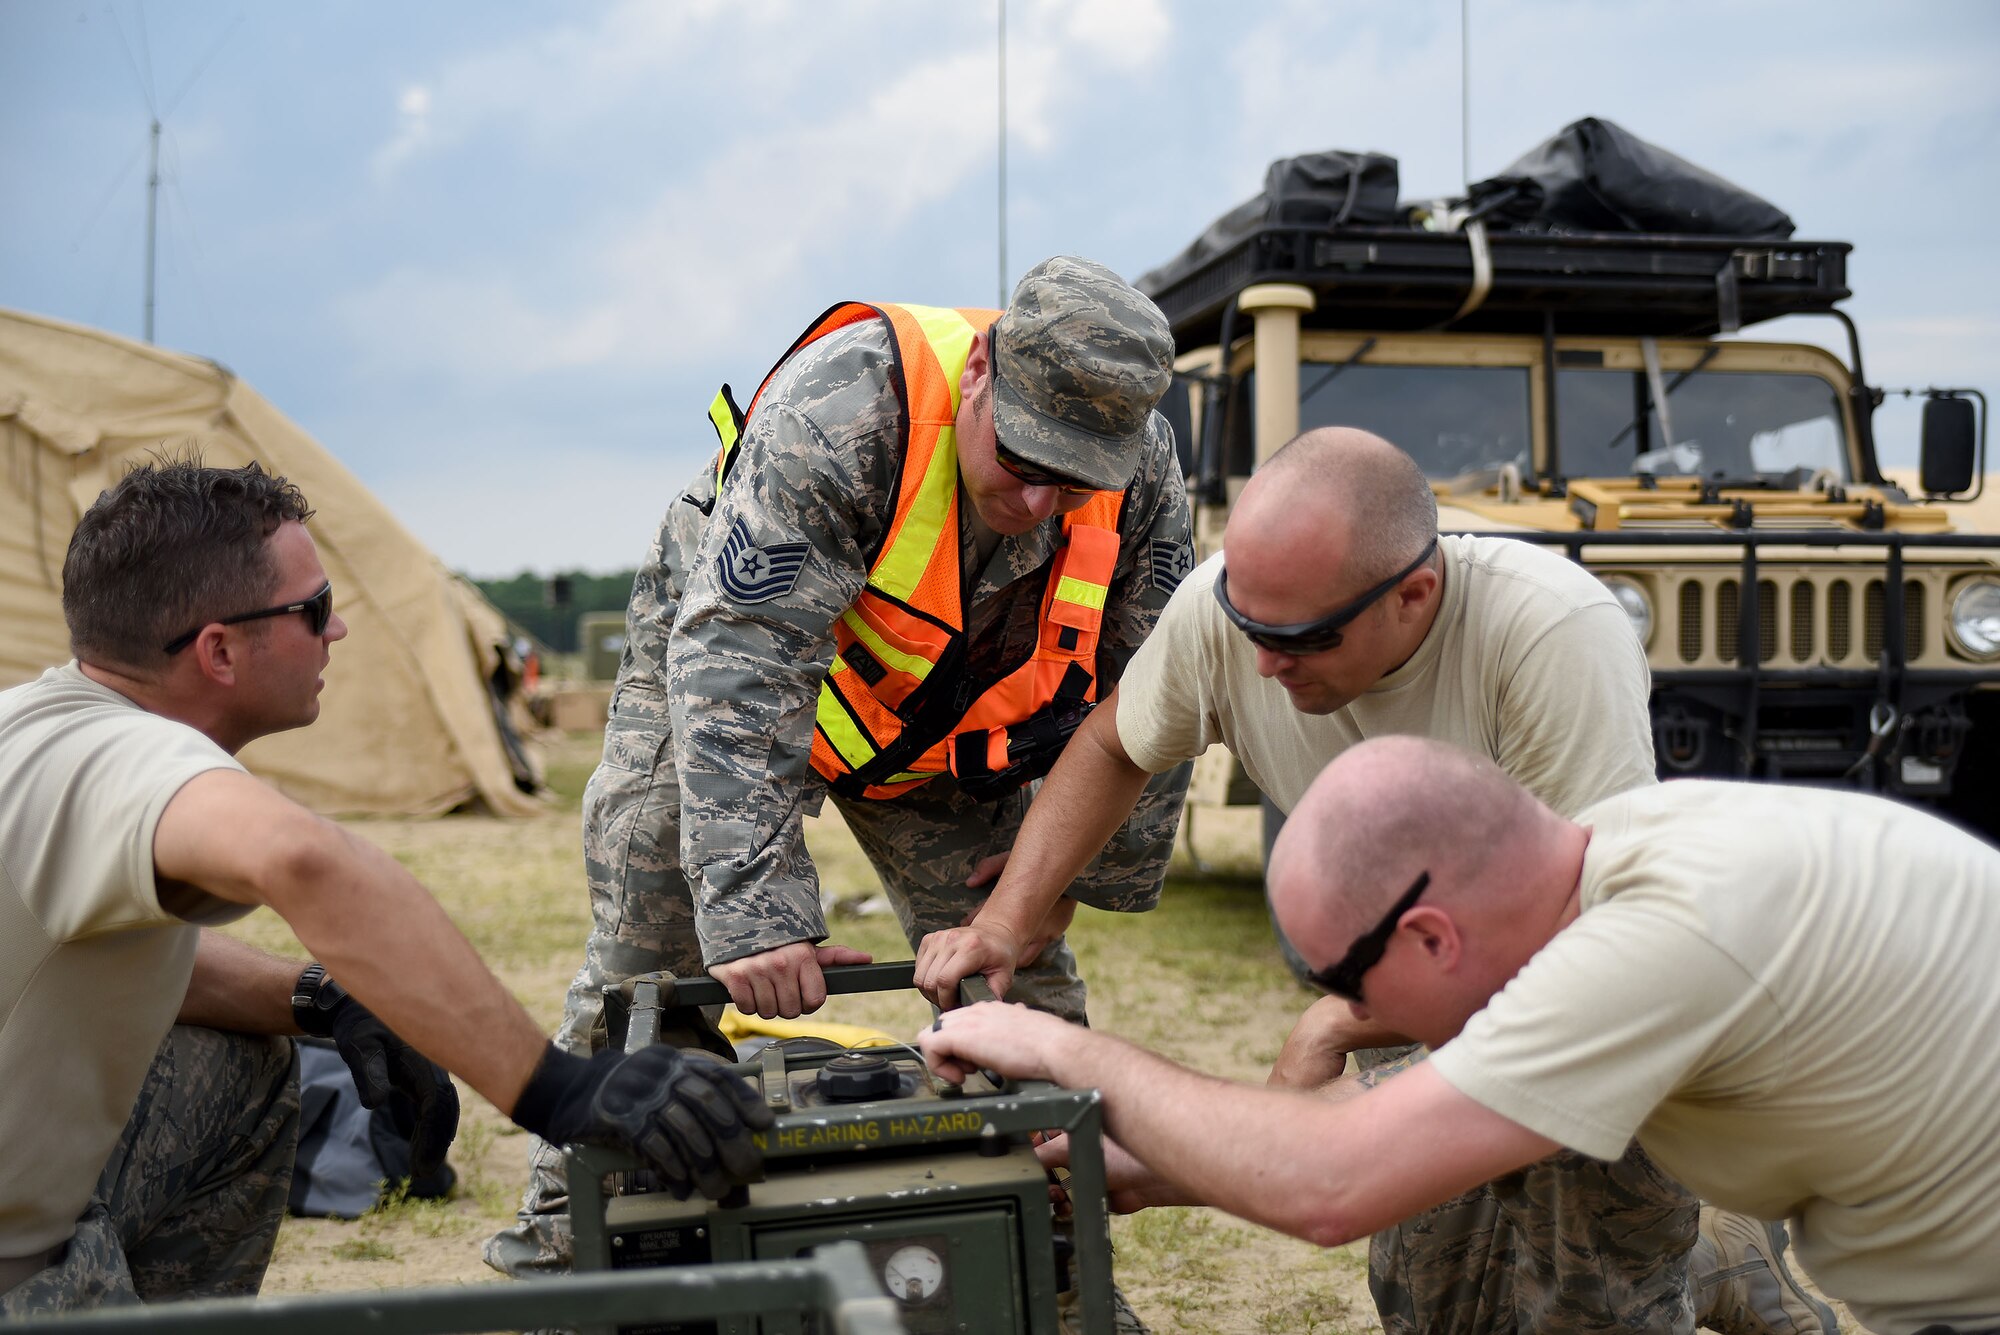 Technical Sgt. Robert Grimes(center), 421st Combat Training Squadron, assists Capt. Kaleb Bury, Capt. Jacob Becker, and Senior Airman Jake Thompson, all of 921st Contingency Response Squadron, with repairing a generator fuel line at Joint Base McGuire-Dix-Lakehurst, New Jersey, on July 21, 2015. Grimes, the Exercise Turbo Distribution site coordinator, supports the assessment of the visiting units’ ability to secure the compound and maintain the safety of participants. TD 15-7, a Joint Task Force-Port Opening (JTF-PO) field training exercise, hosted by the U.S. Air Force Expeditionary Center at Joint Base McGuire-Dix-Lakehurst, New Jersey, tests the ability to rapidly deploy and employ a JTF-PO Aerial Port of Debarkation (APOD) enabling capability in direct support to a regional combatant command. (U.S. Air Force photo/Danielle Brooks)